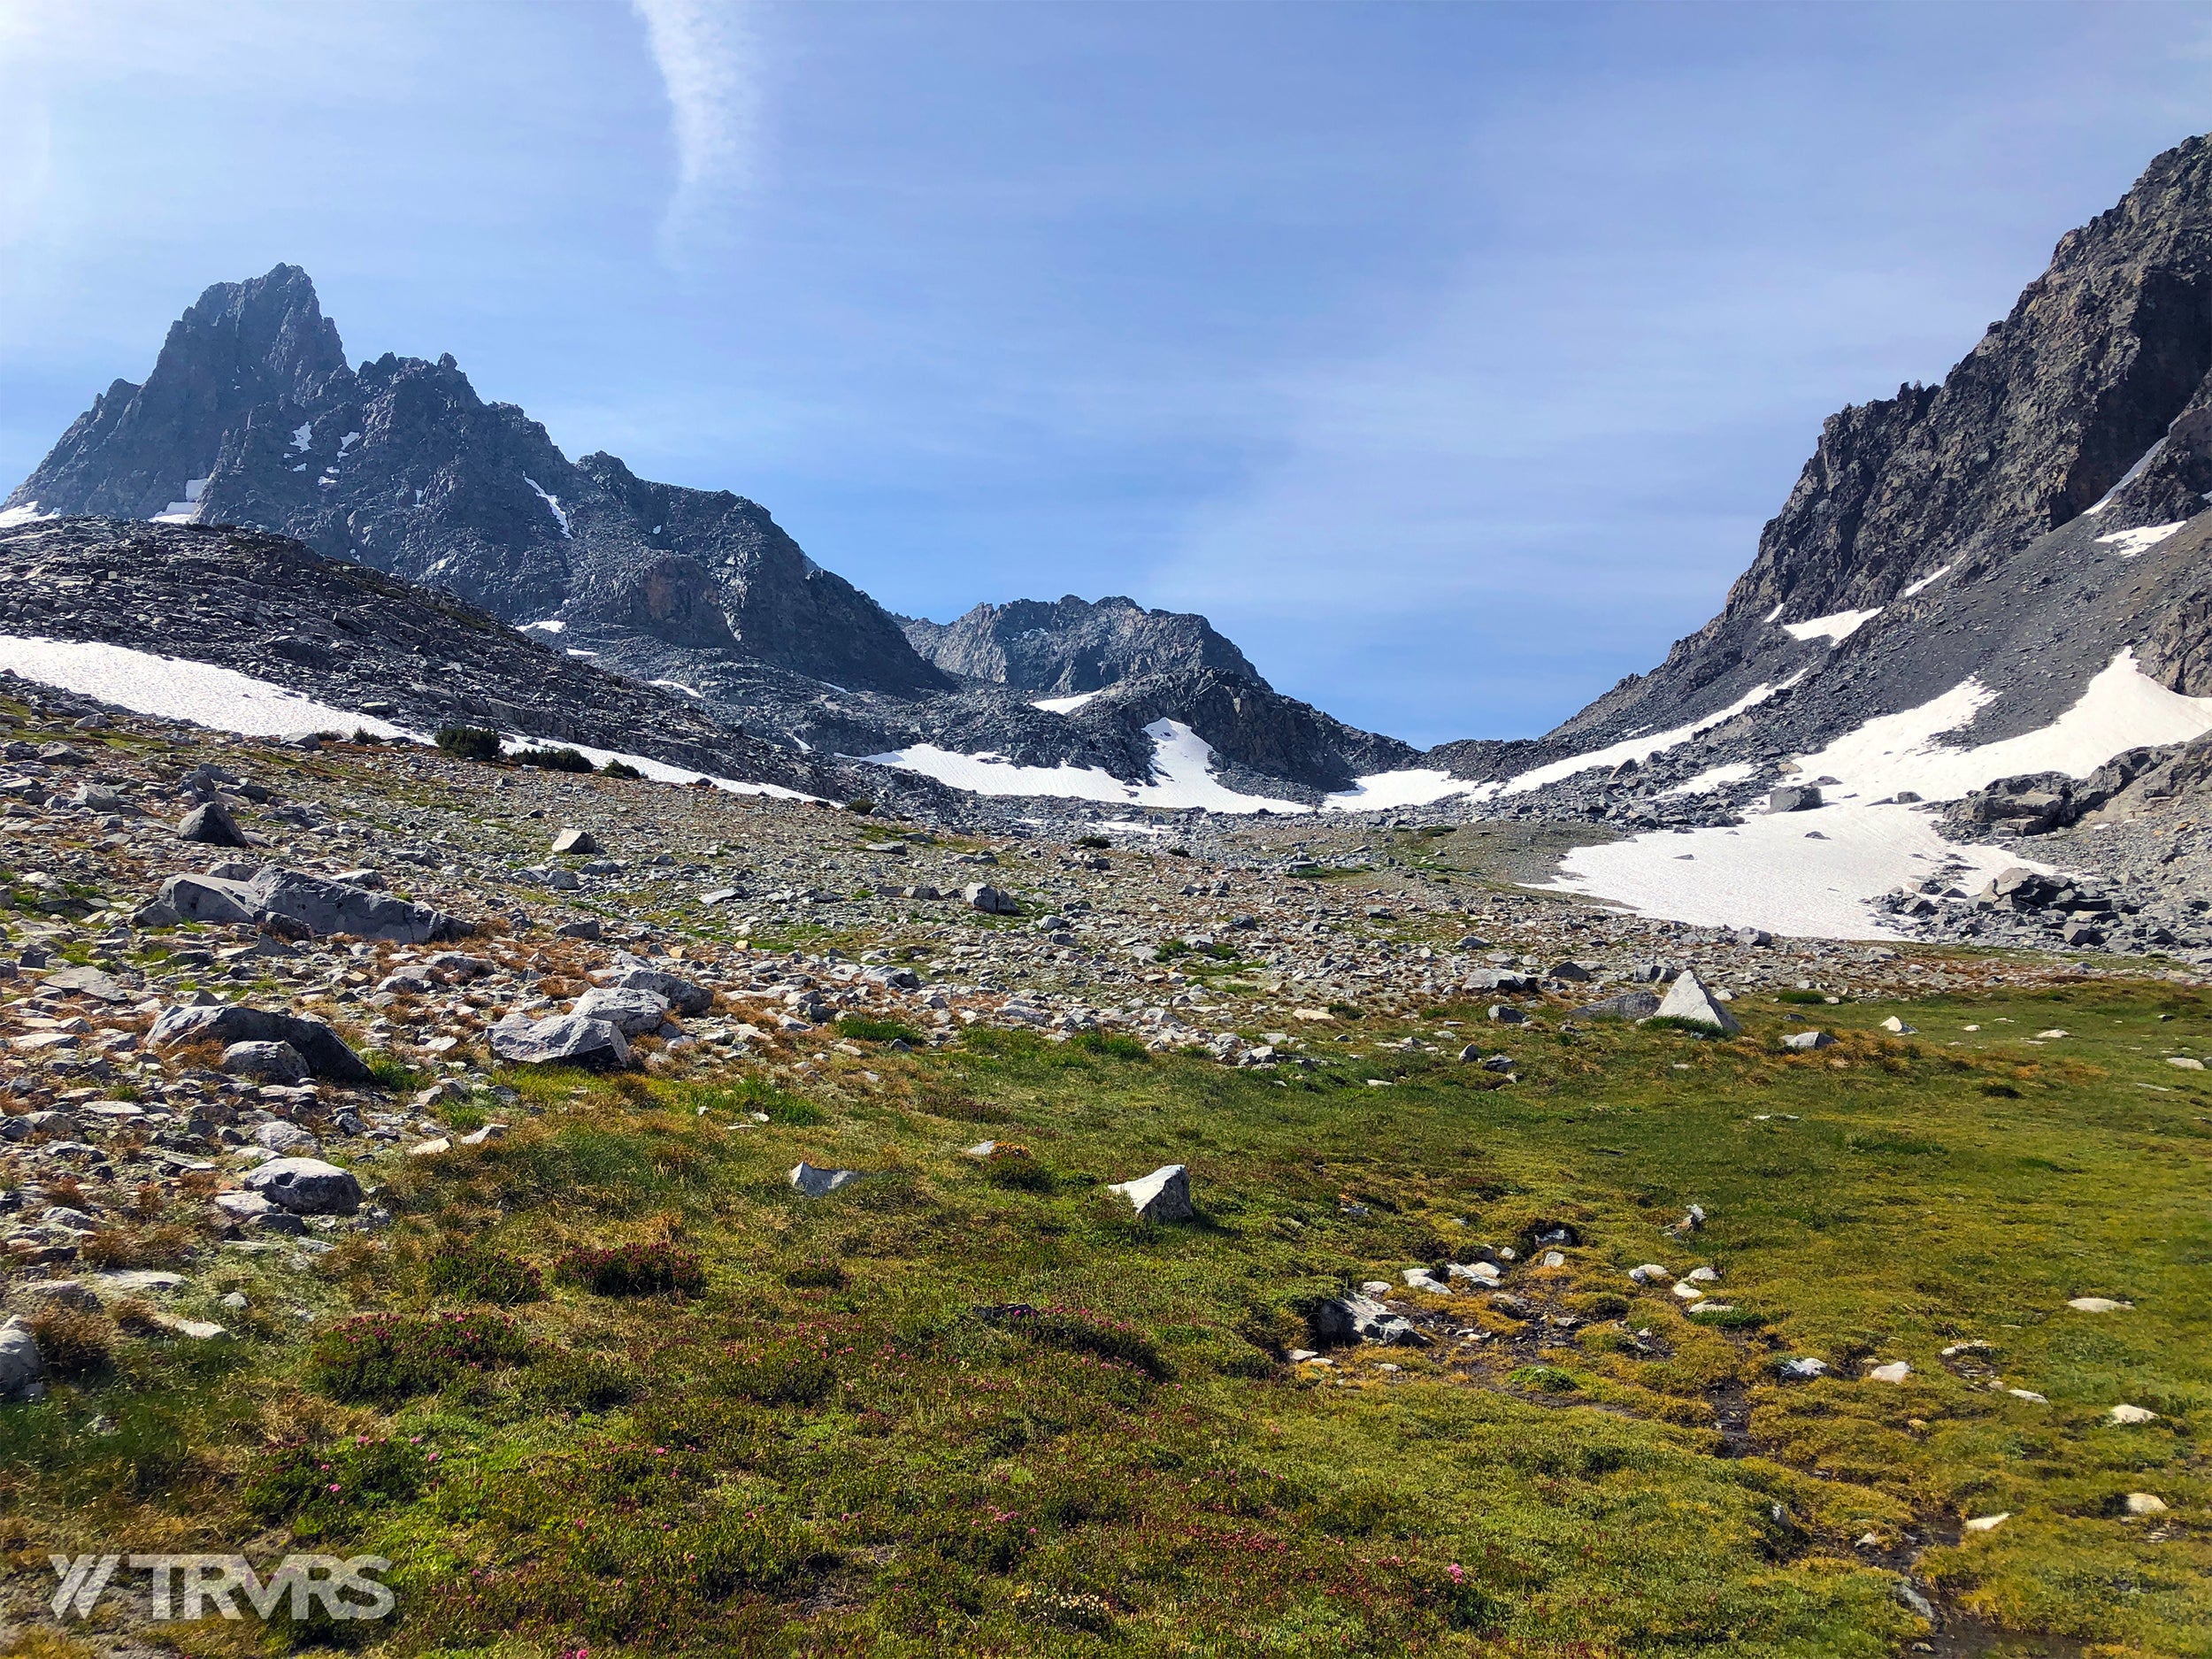 Approaching Glacier Pass- Banner Peak, Ritter-Banner Saddle, Lake Catherine, Glacier Pass, Thousand Island Lake, River Trail, Pacific Crest Trail, Middle Fork, Agnew Meadow, Ansel Adams Wilderness, Mammoth Lakes, Sierra Nevada | TRVRS Apparel